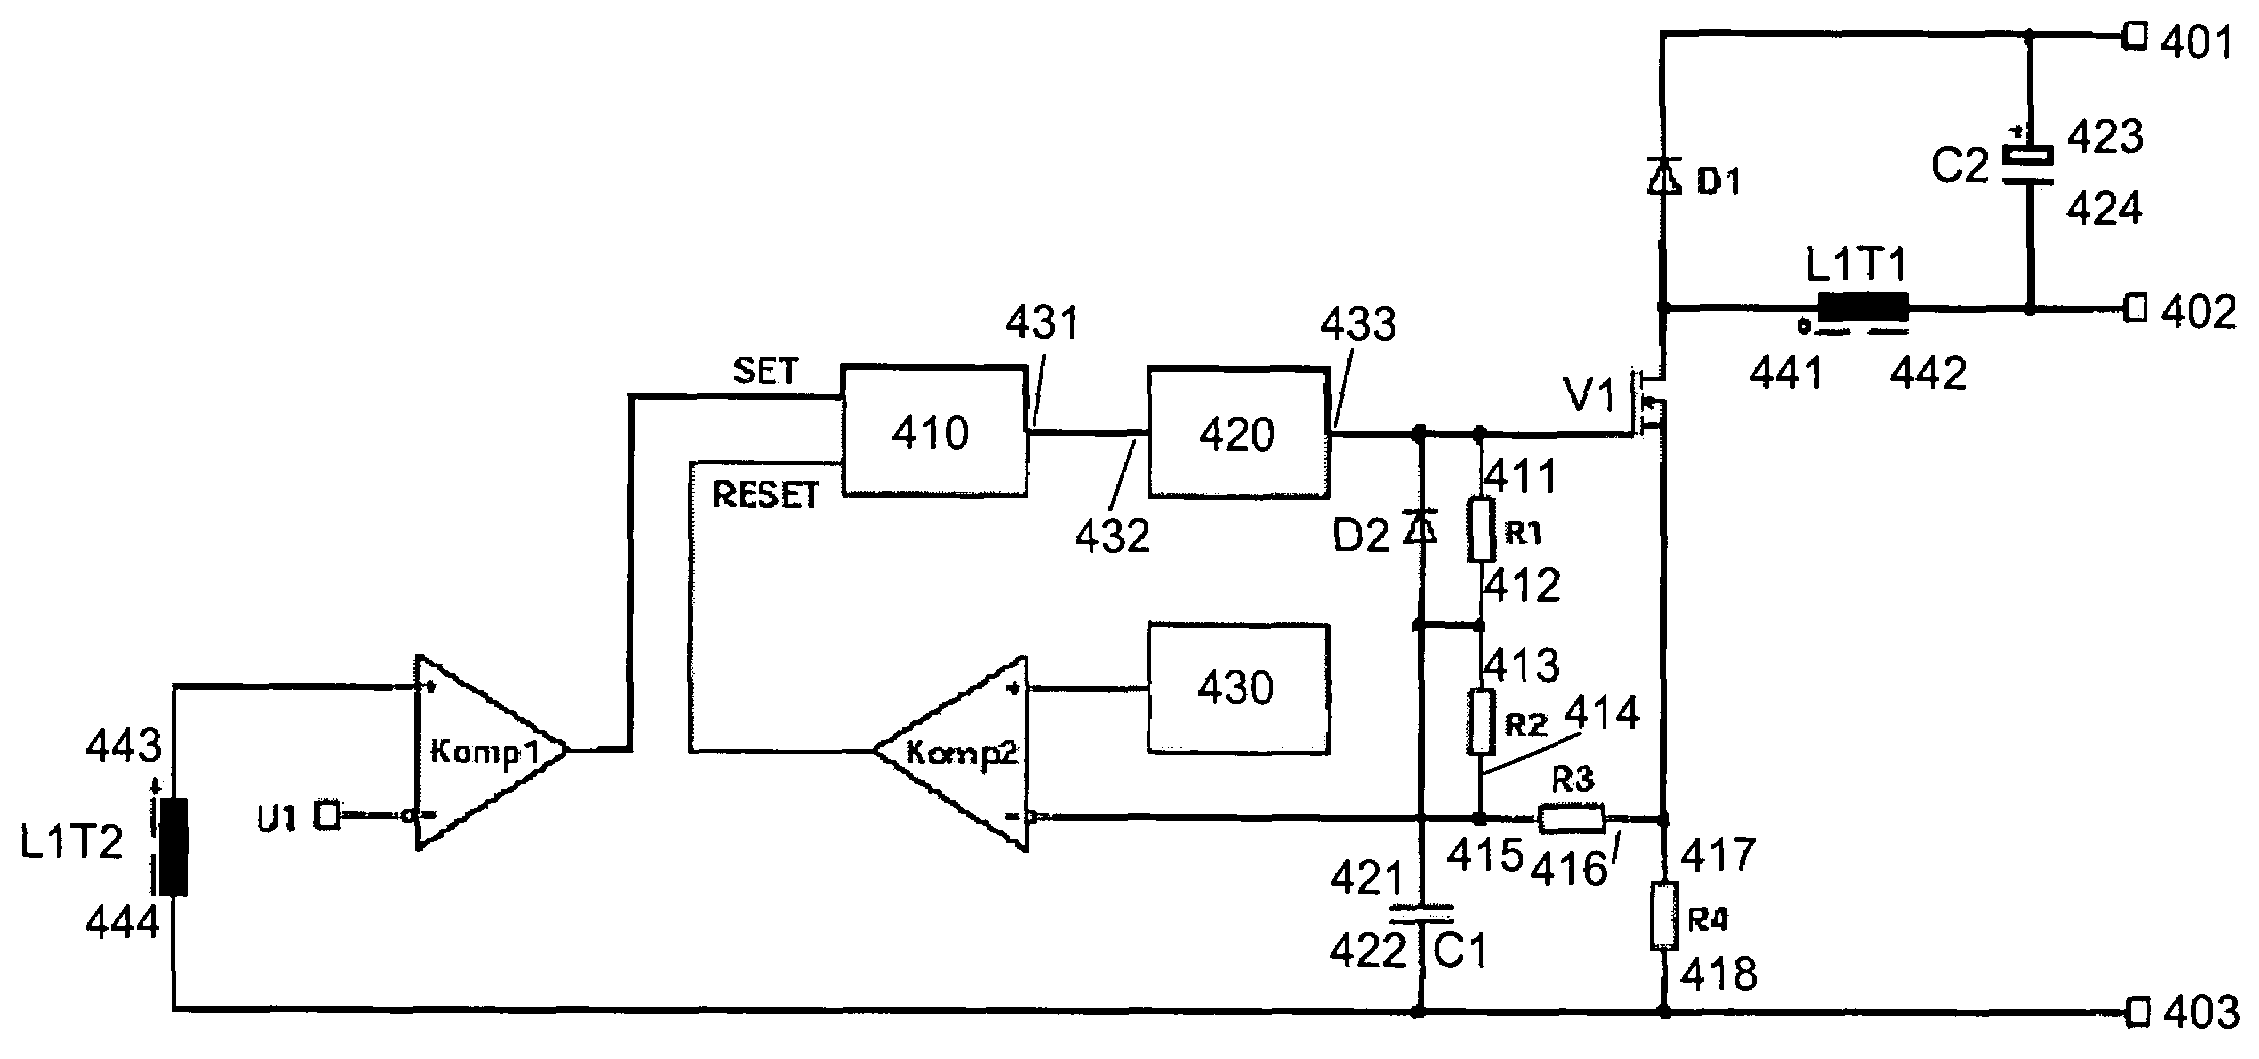 Buck converter with demagnetization detection of the inductor